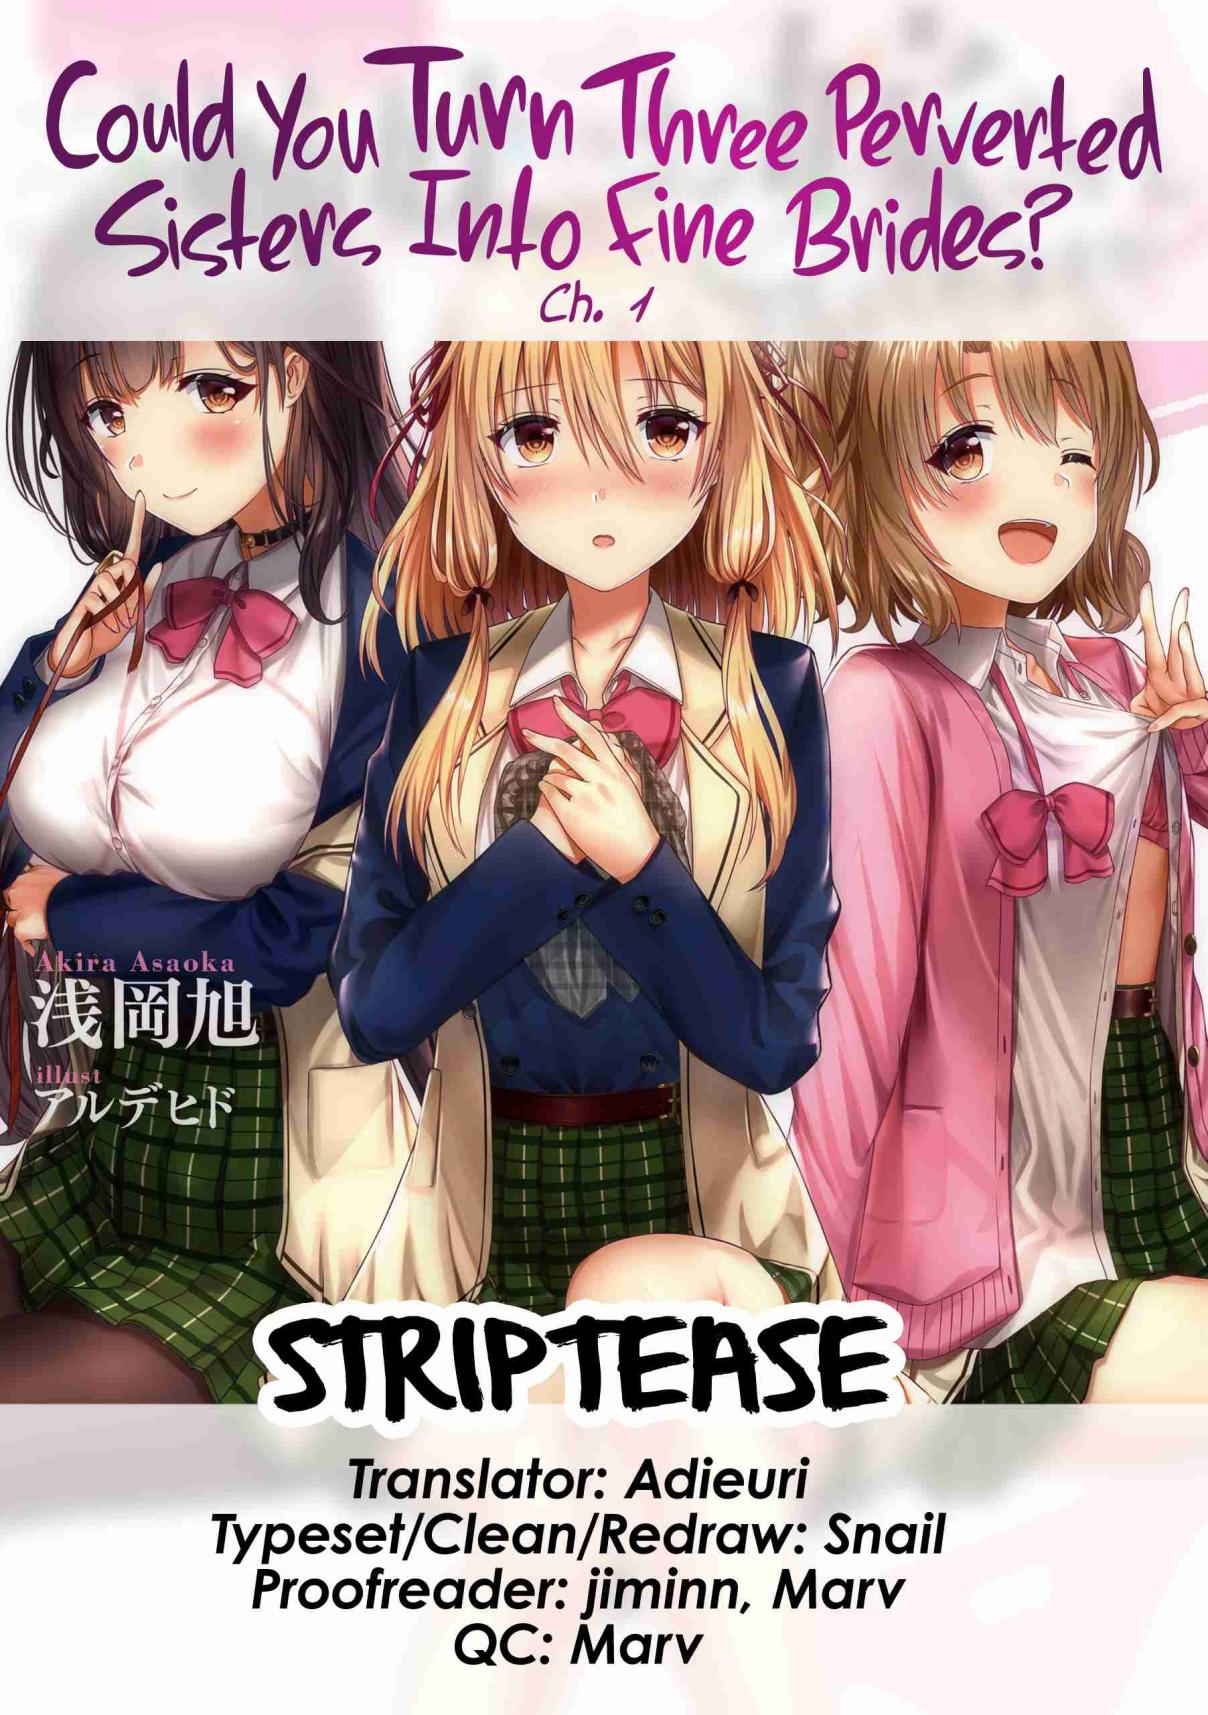 Could You Turn Three Perverted Sisters Into Fine Brides? Ch. 1